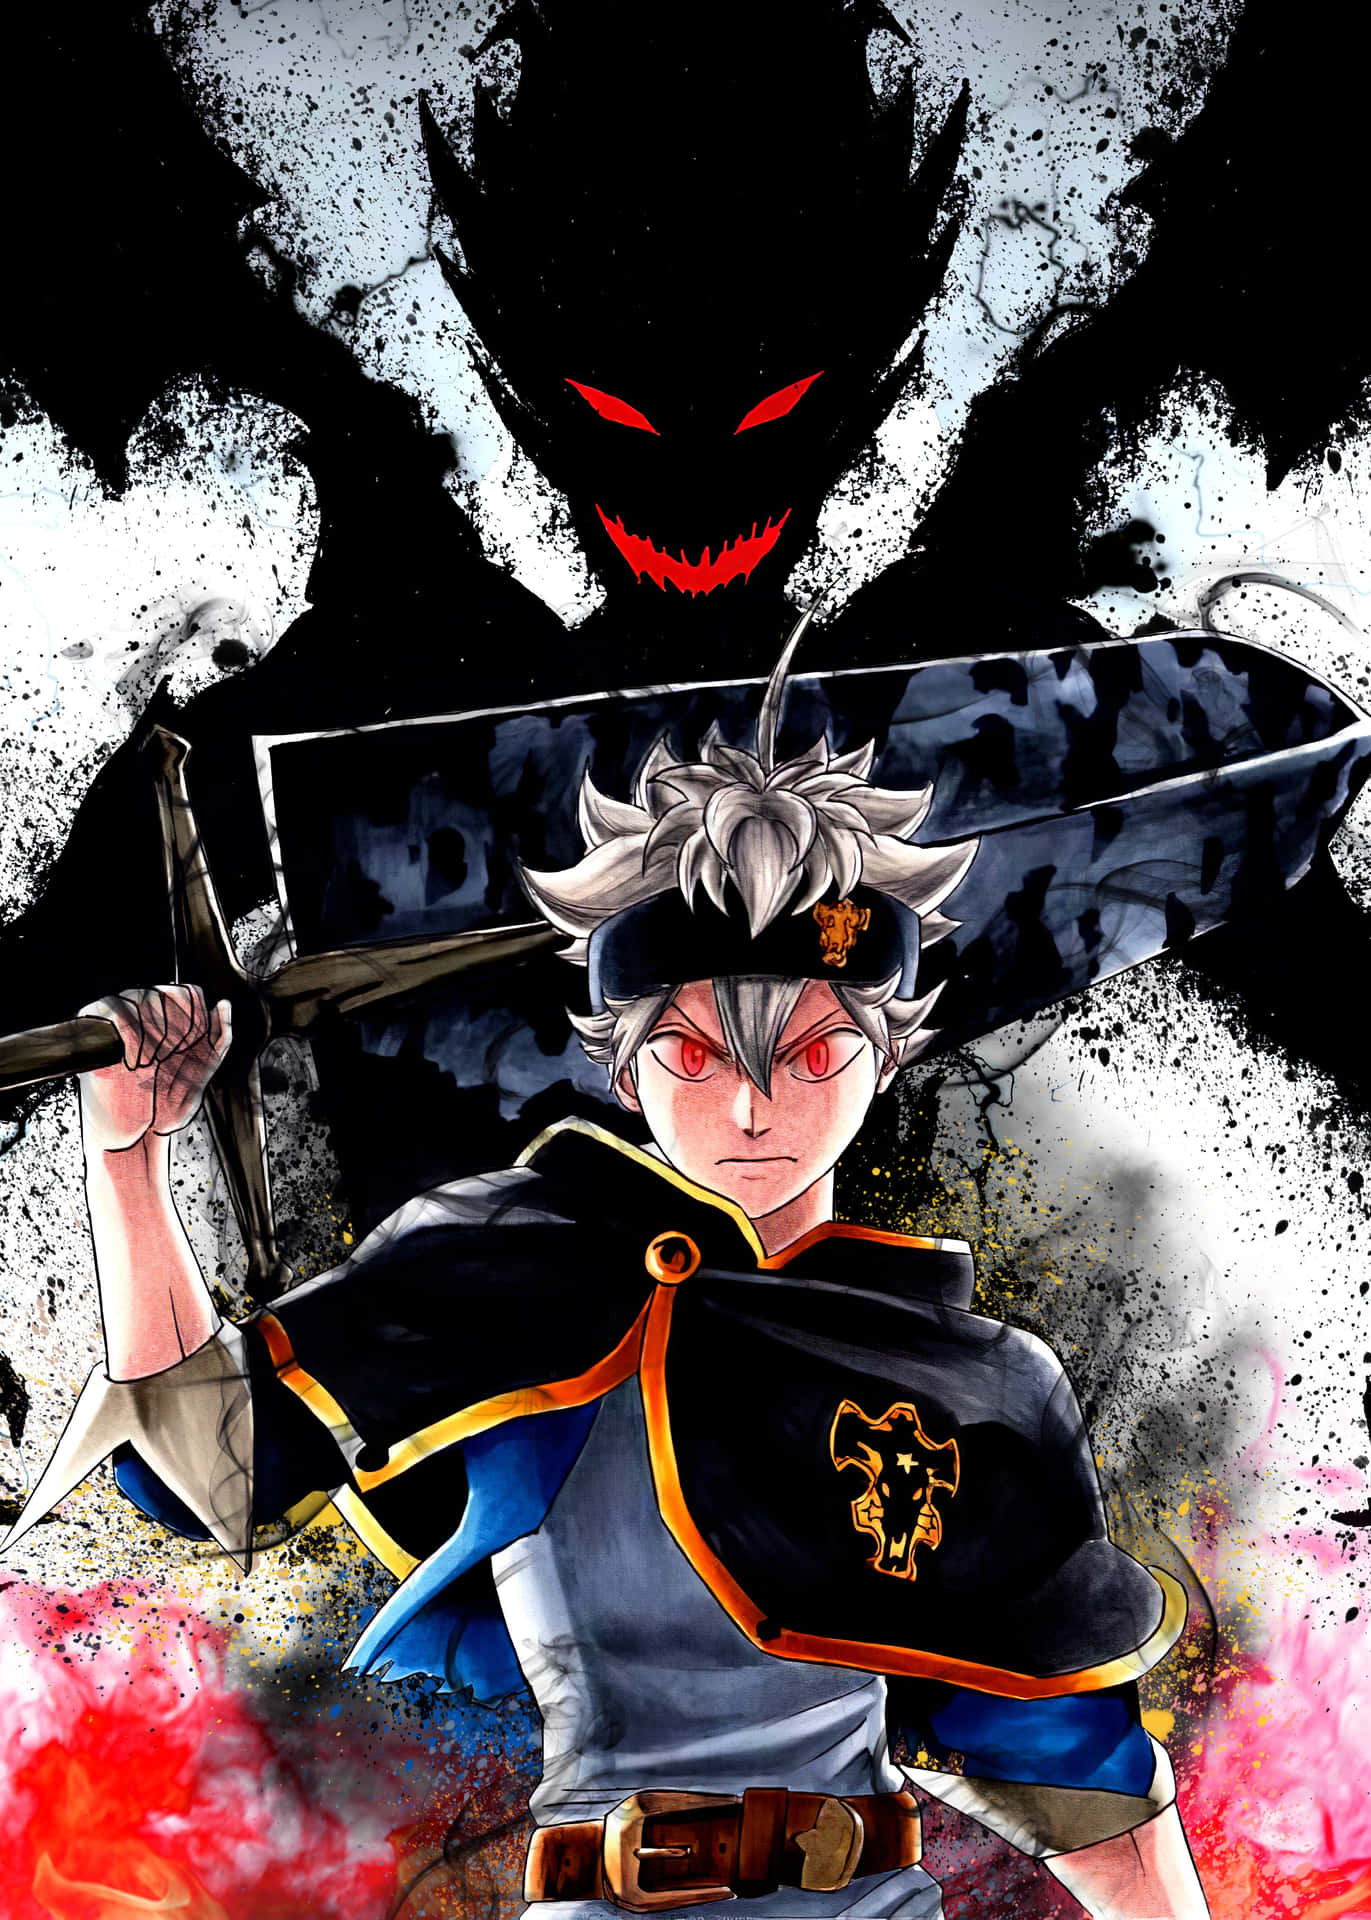 Asta and Yuno, the two young leads of the manga series Black Clover